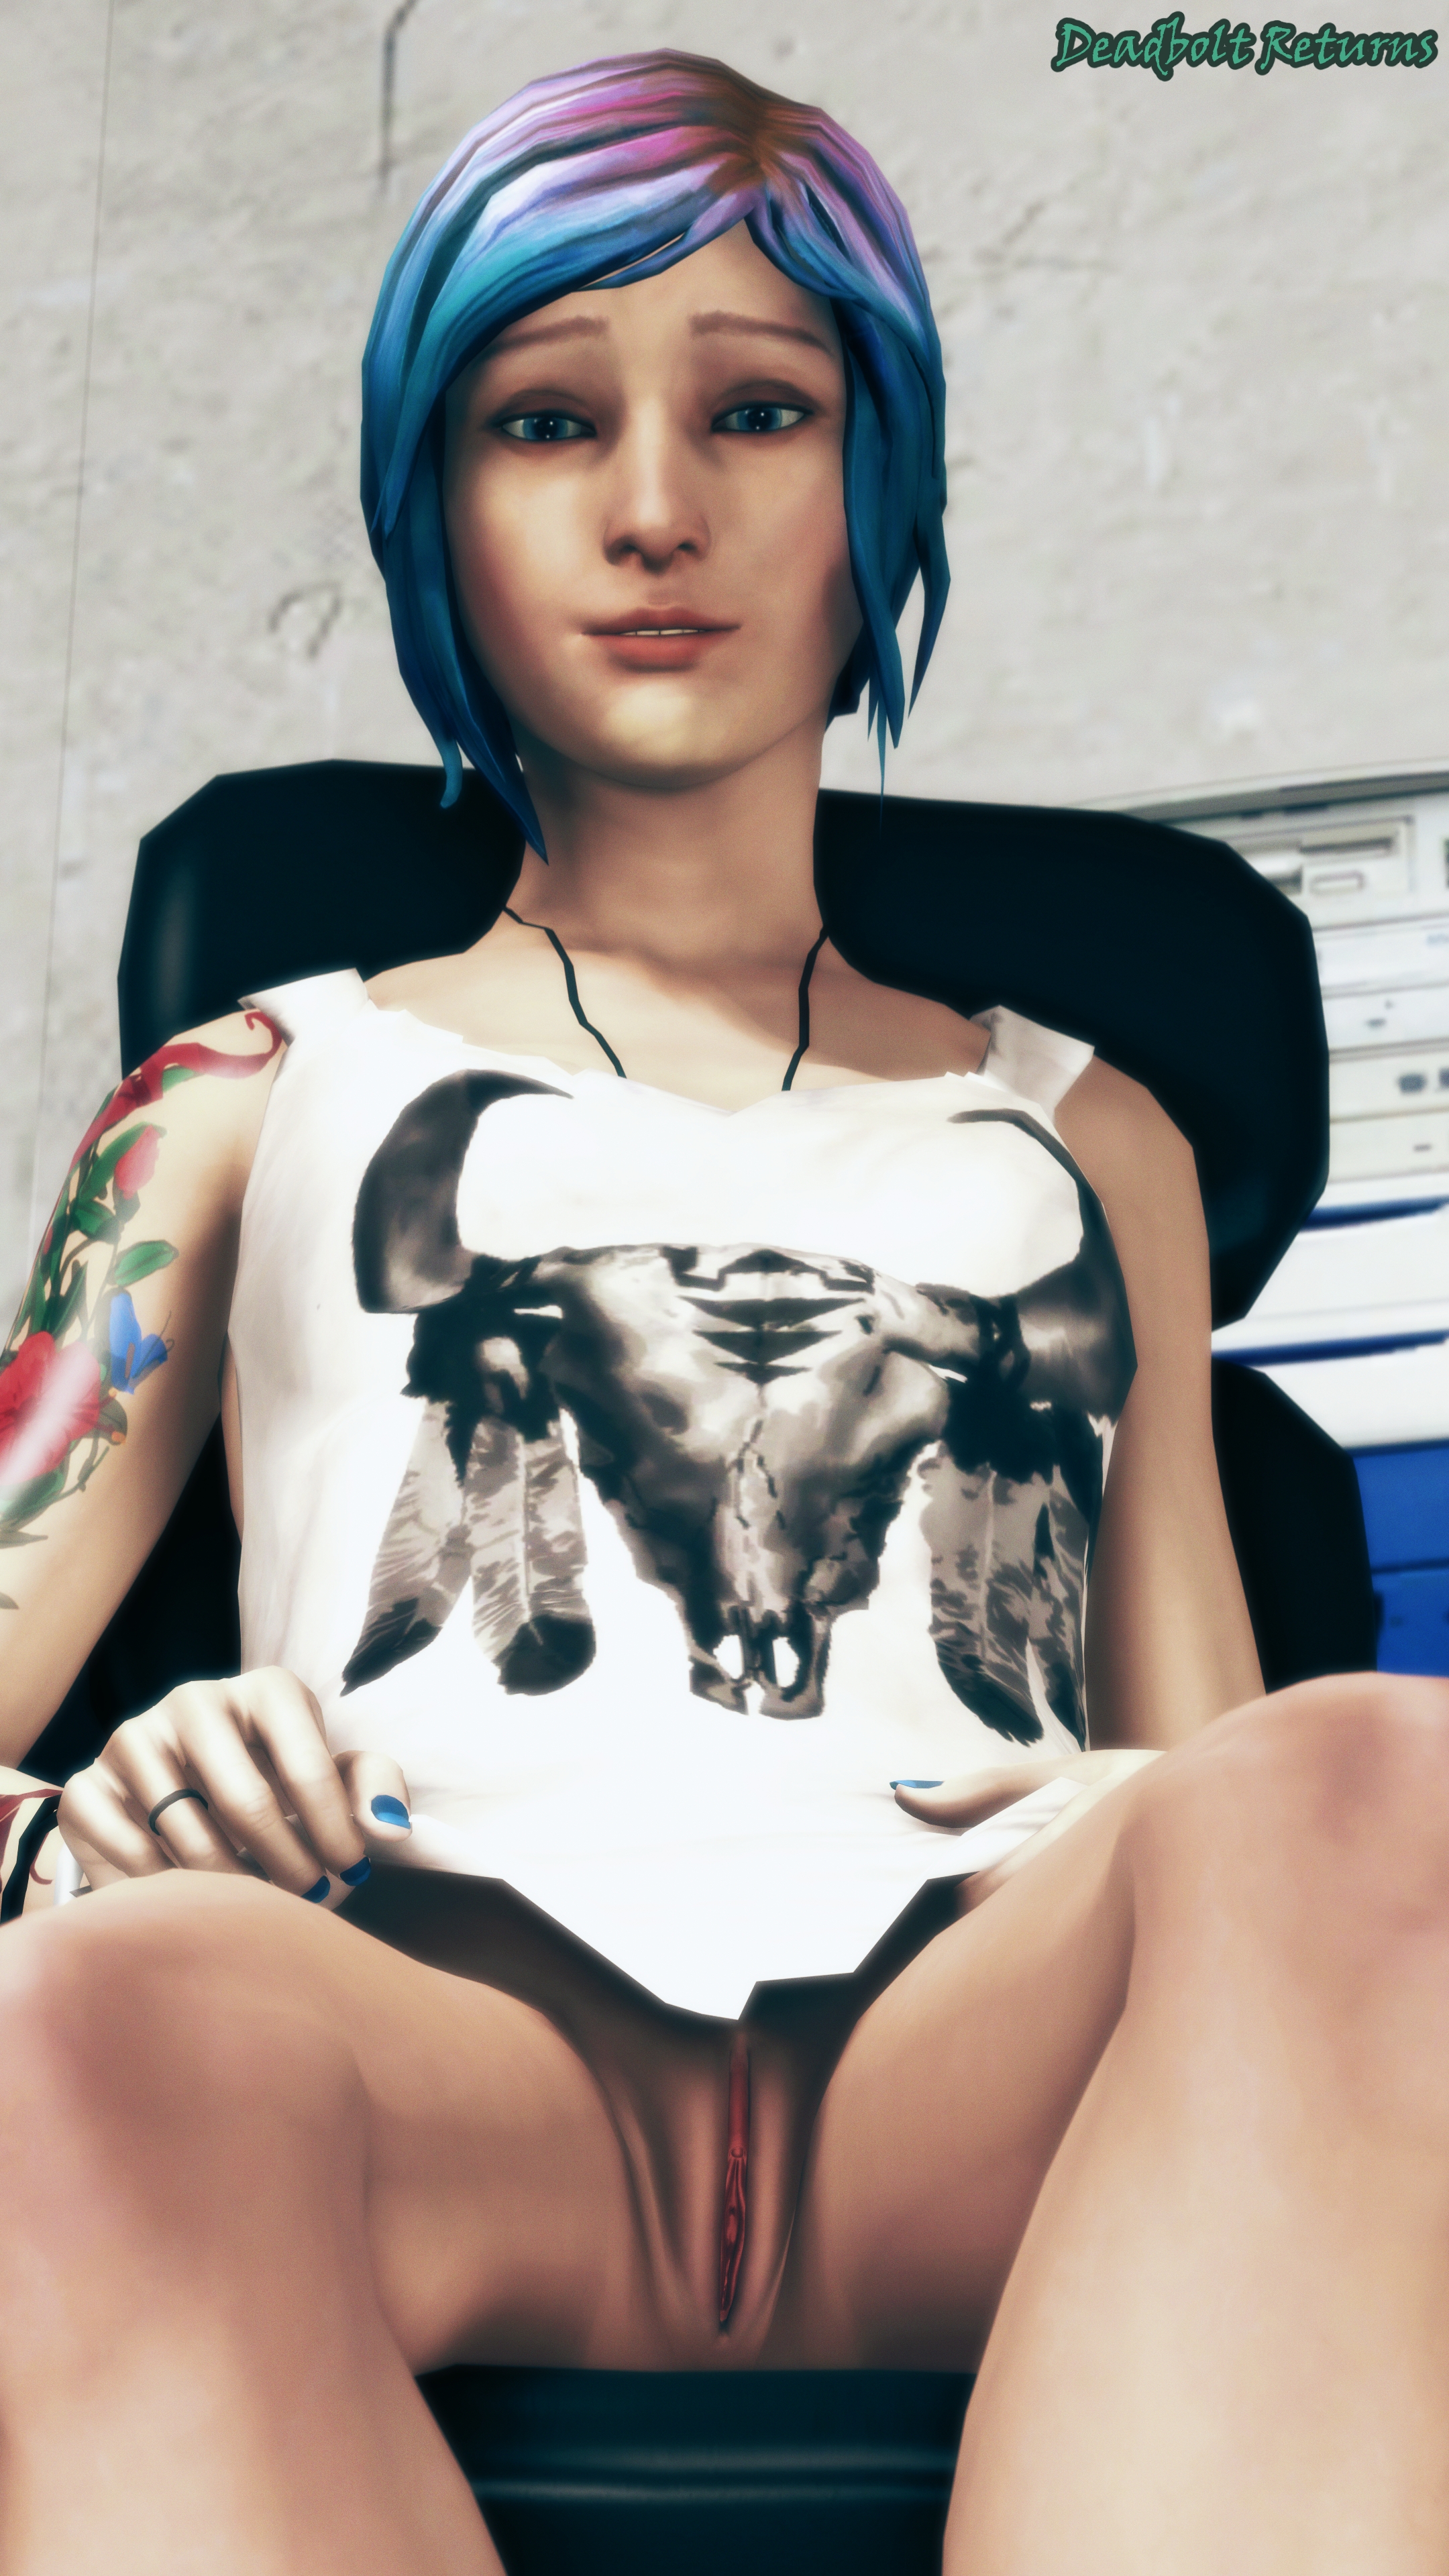 Chloe Price Returns to the Casting Couch Chloe Price Chloe Life Is Strange Sfm Source Filmmaker Rule34 Rule 34 3d Porn 3d Girl 3dnsfw Nsfw Casting Couch 3